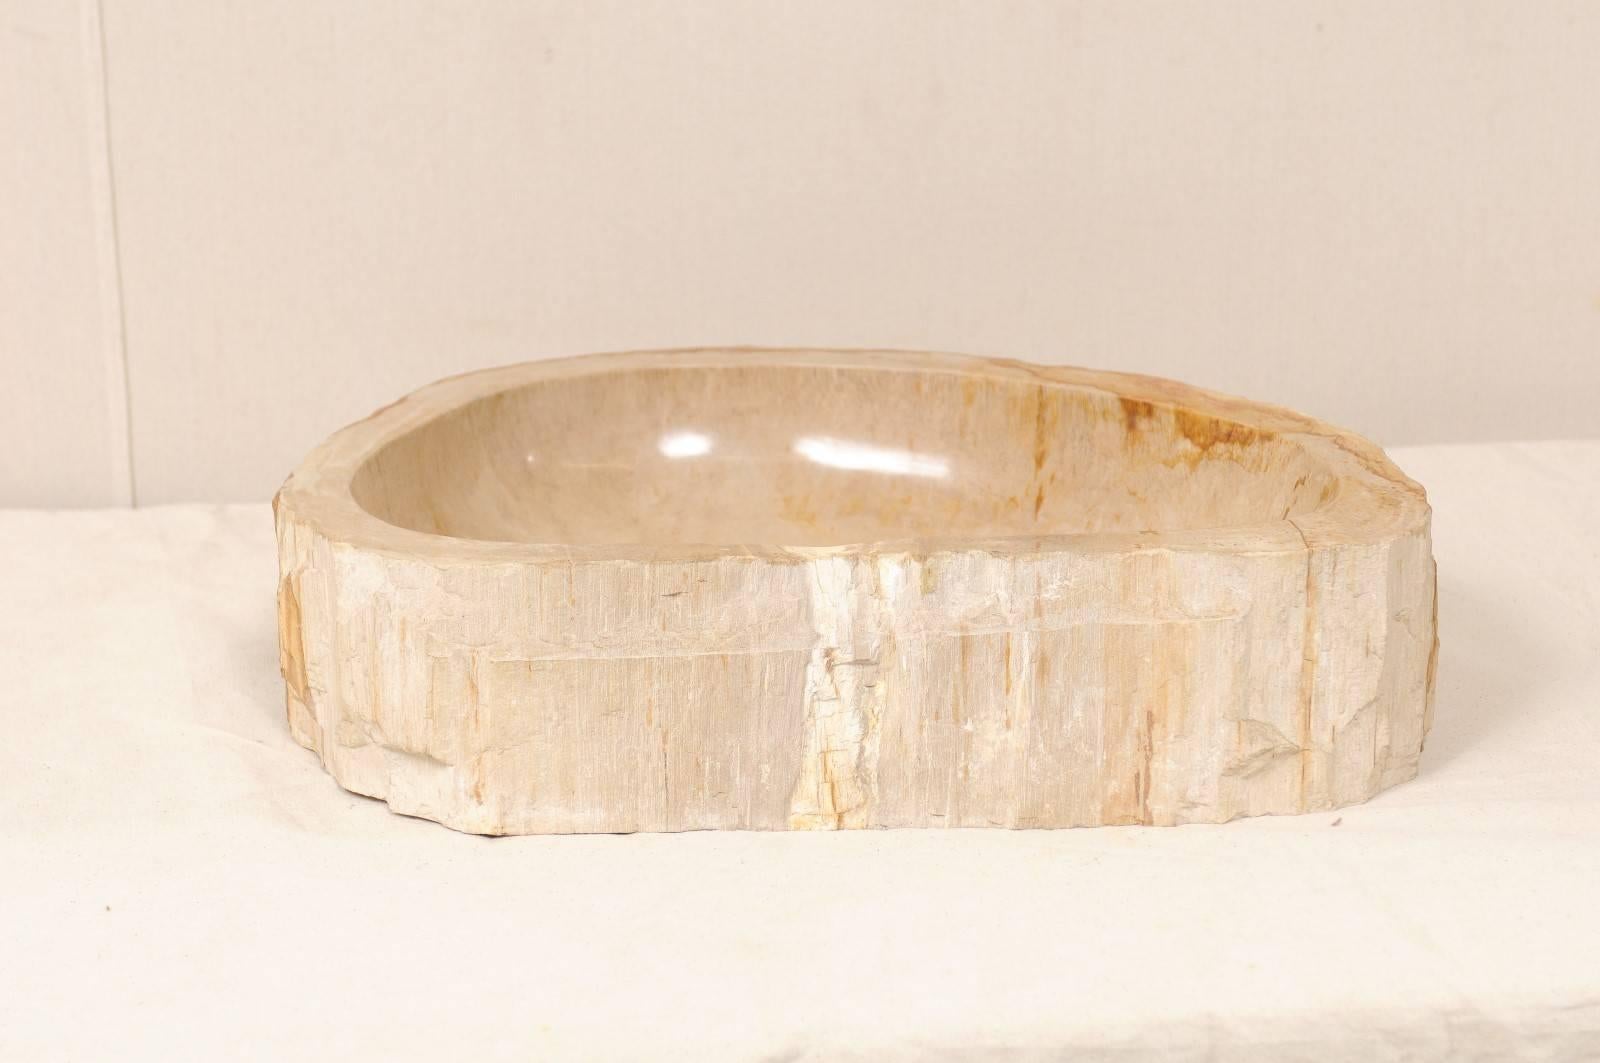 Polished Petrified Wood Sink in Cream and Beige Tones, Perfect for a Vanity 1